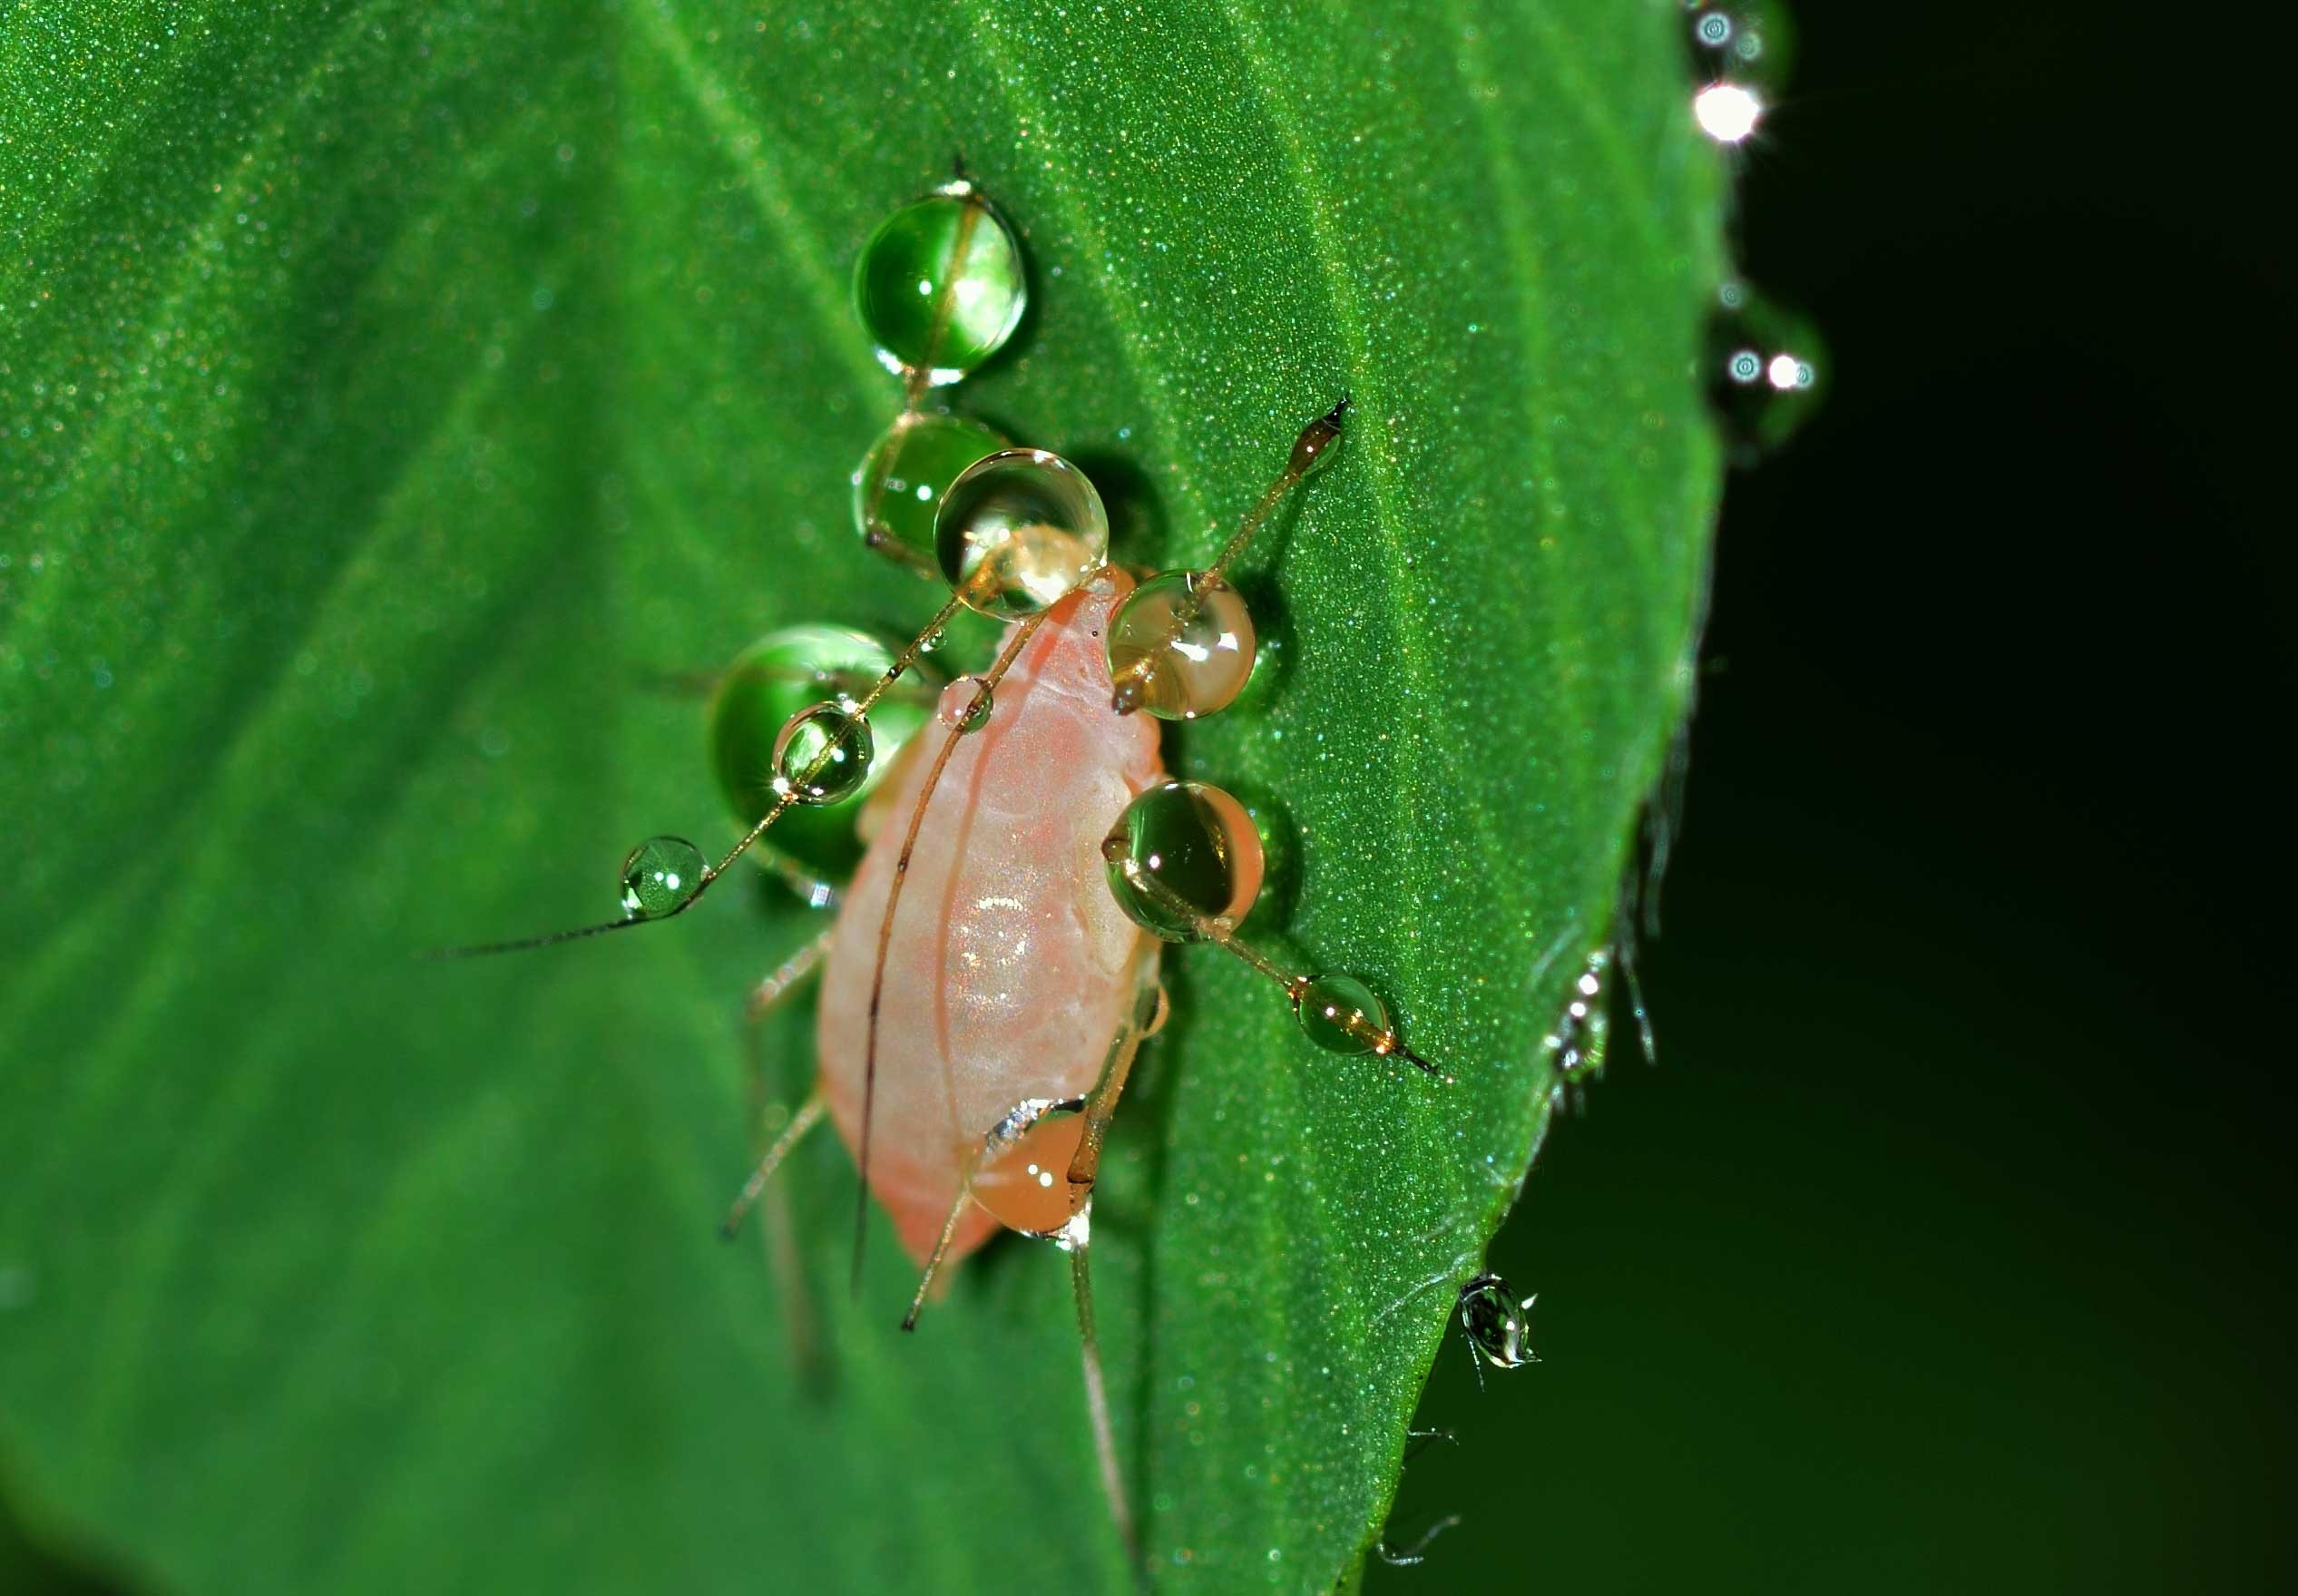 Drops, Aphid, Water, Insects, Hemiptera, one animal, green color